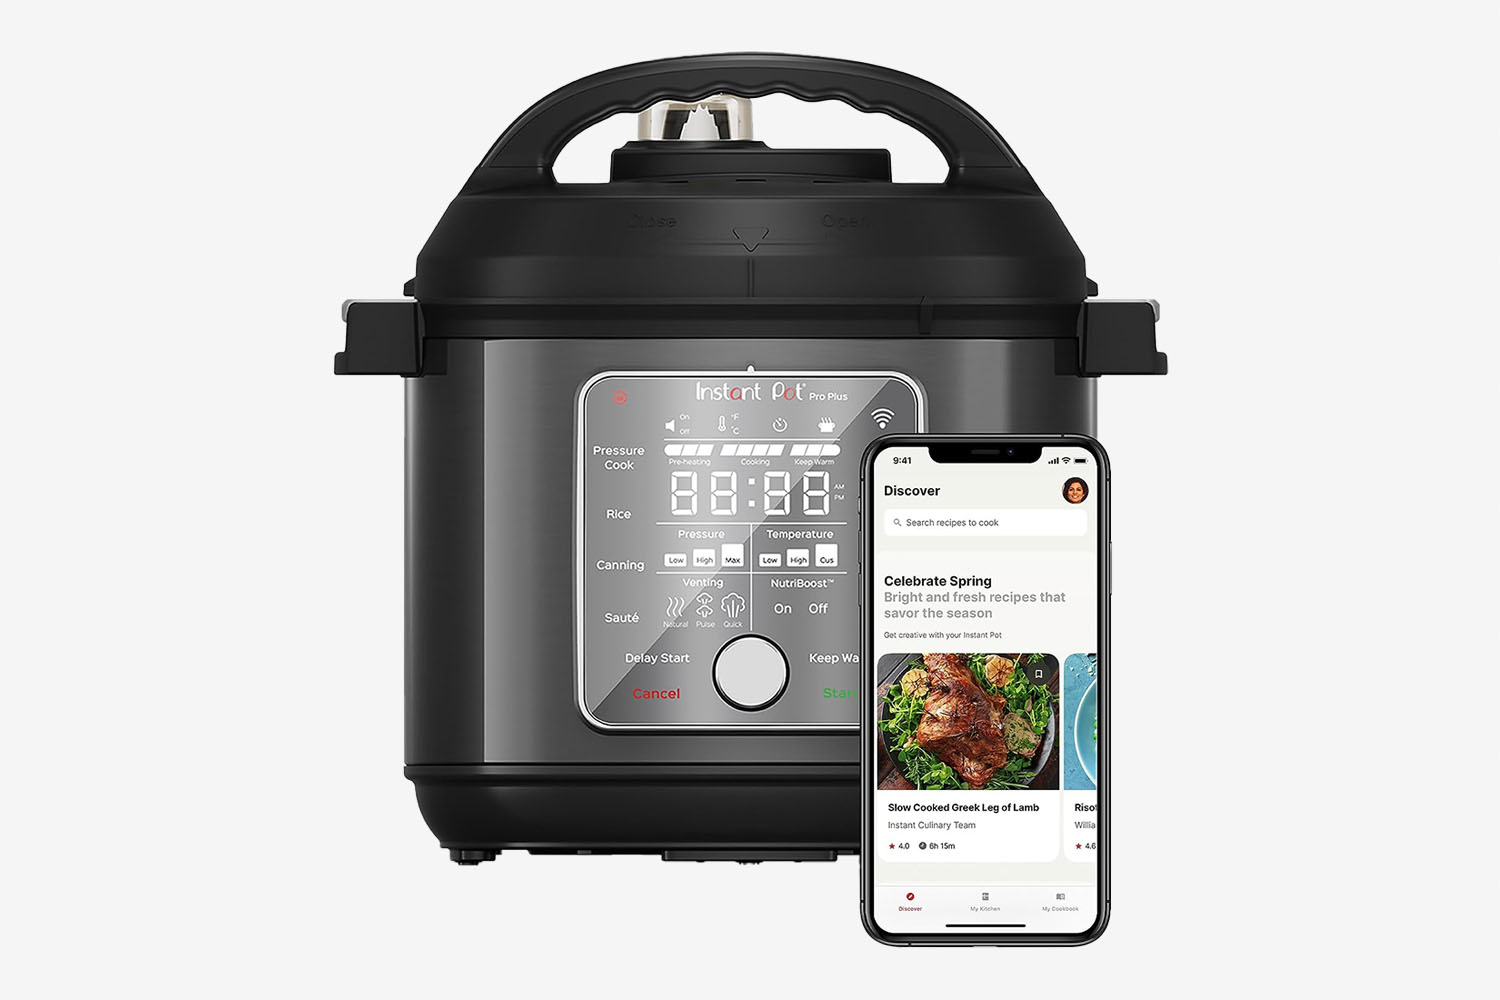 KitchenAid Yummly Smart Meat Thermometer with Wireless Bluetooth  Connectivity, Heritage White 